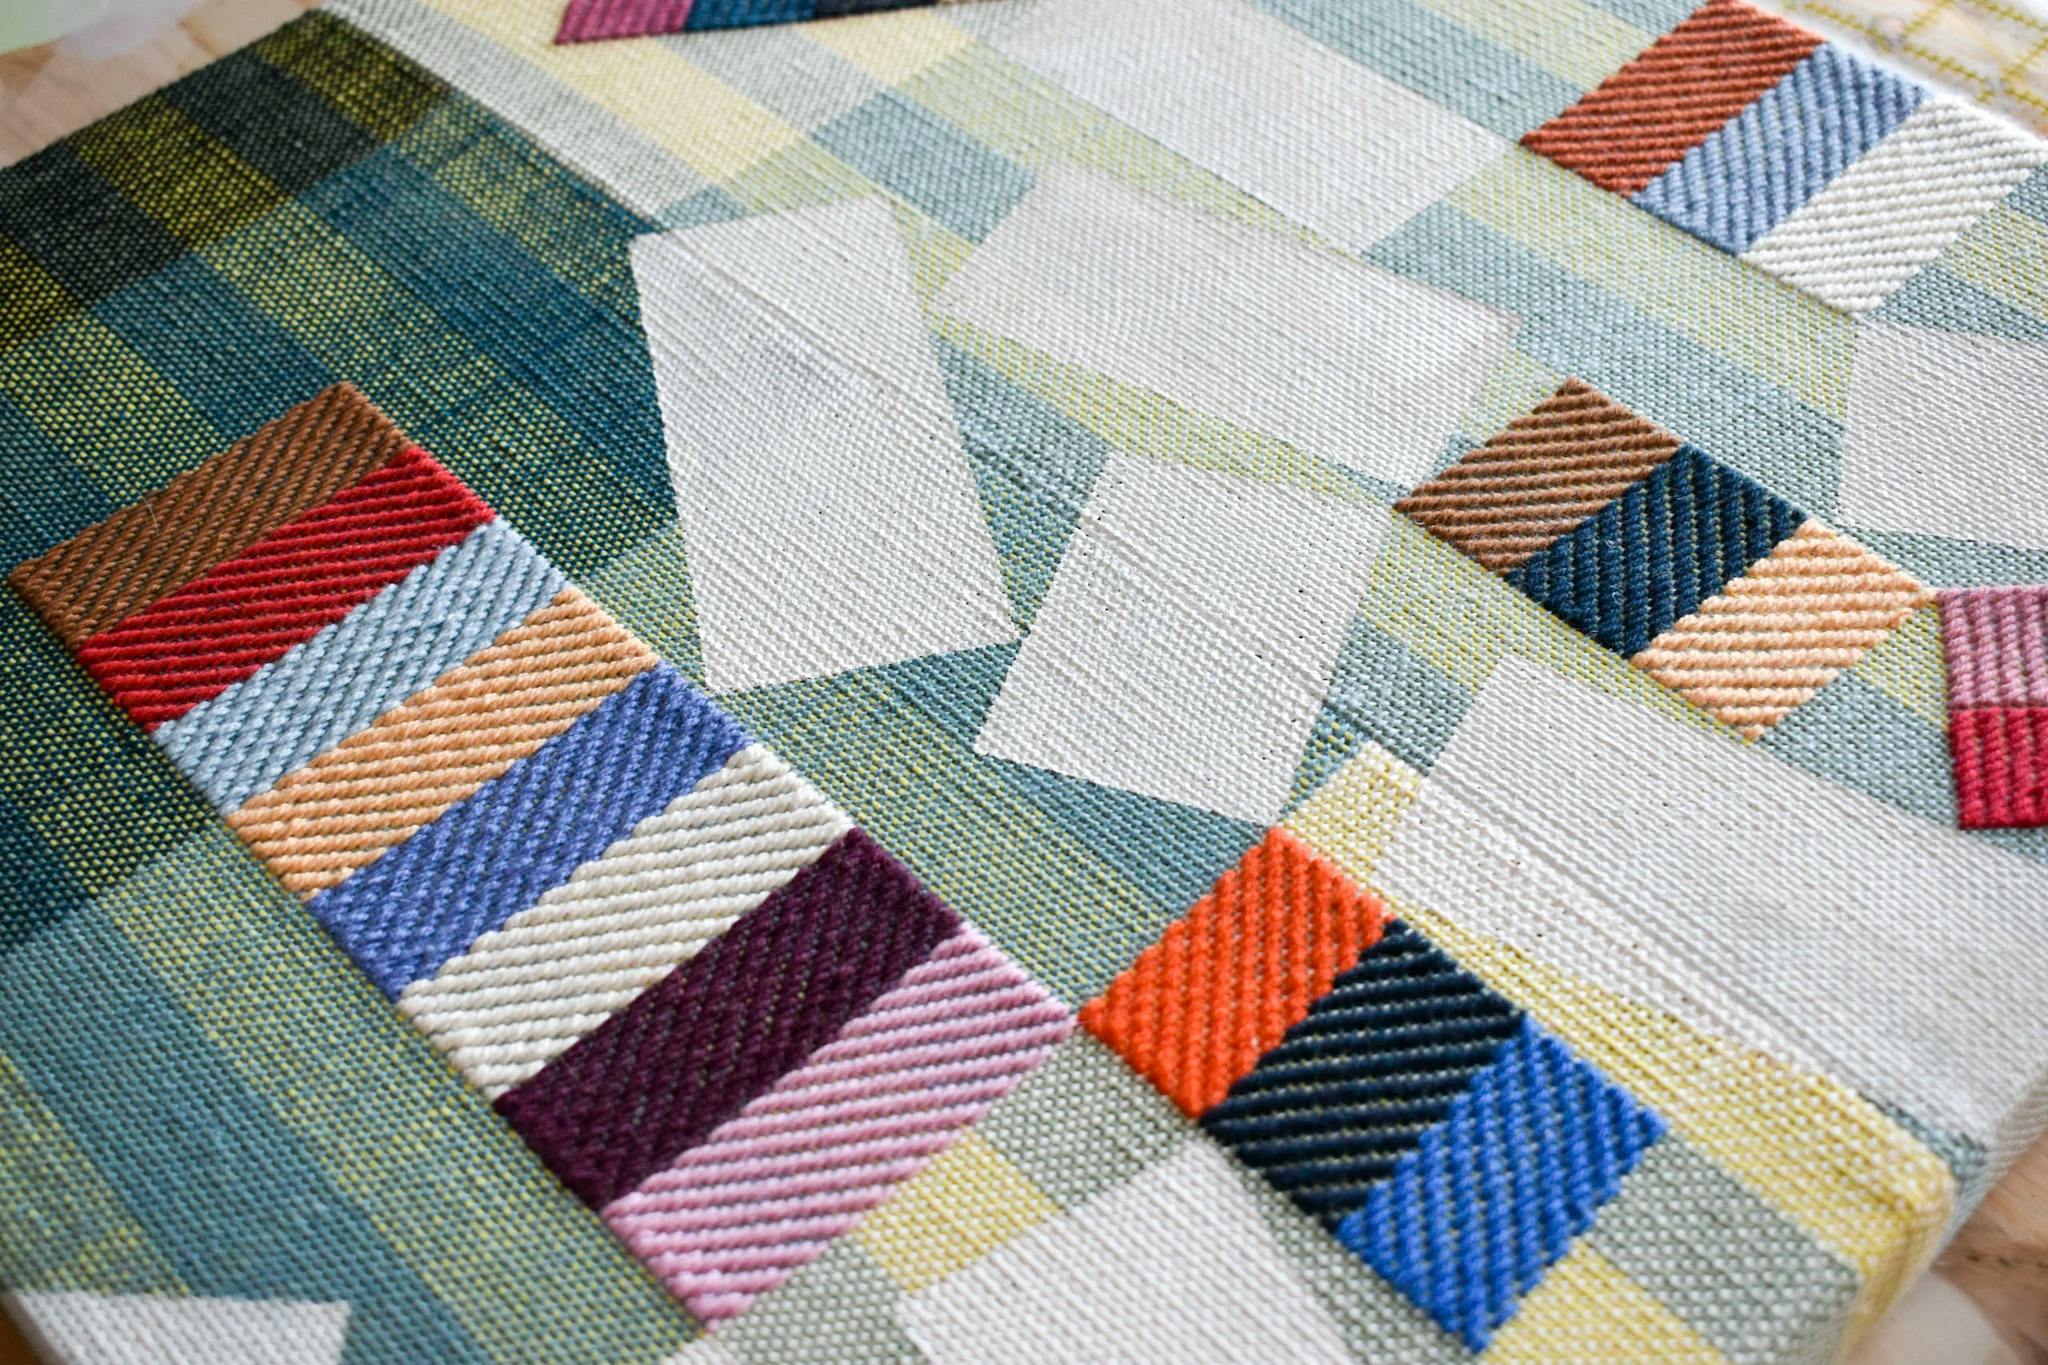 A close-up of handwoven striped patches on canvas by artist Sarah Sullivan Sherrod.